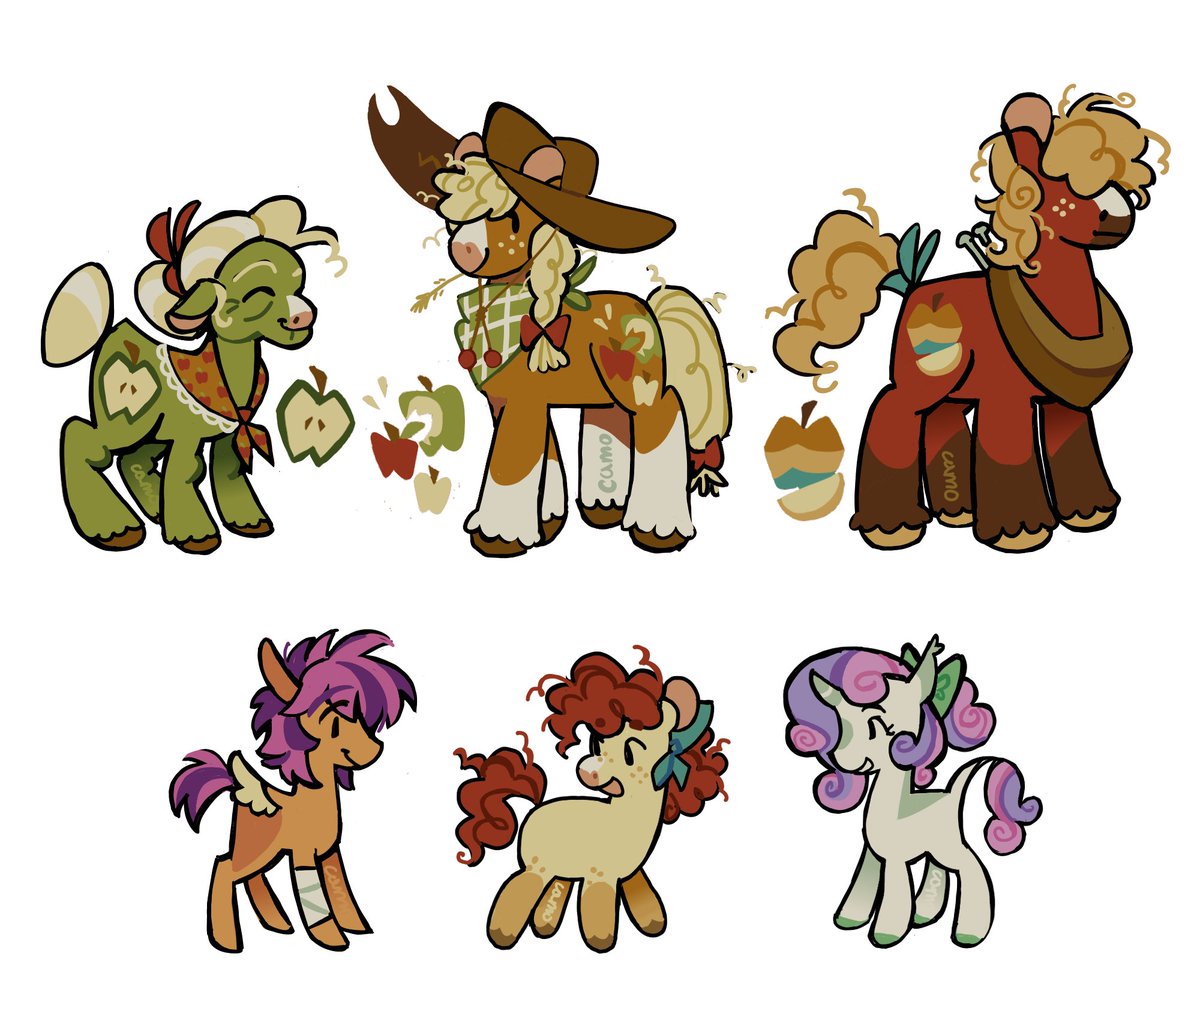 [mlp] apple family + cmc redesigns!! : ]